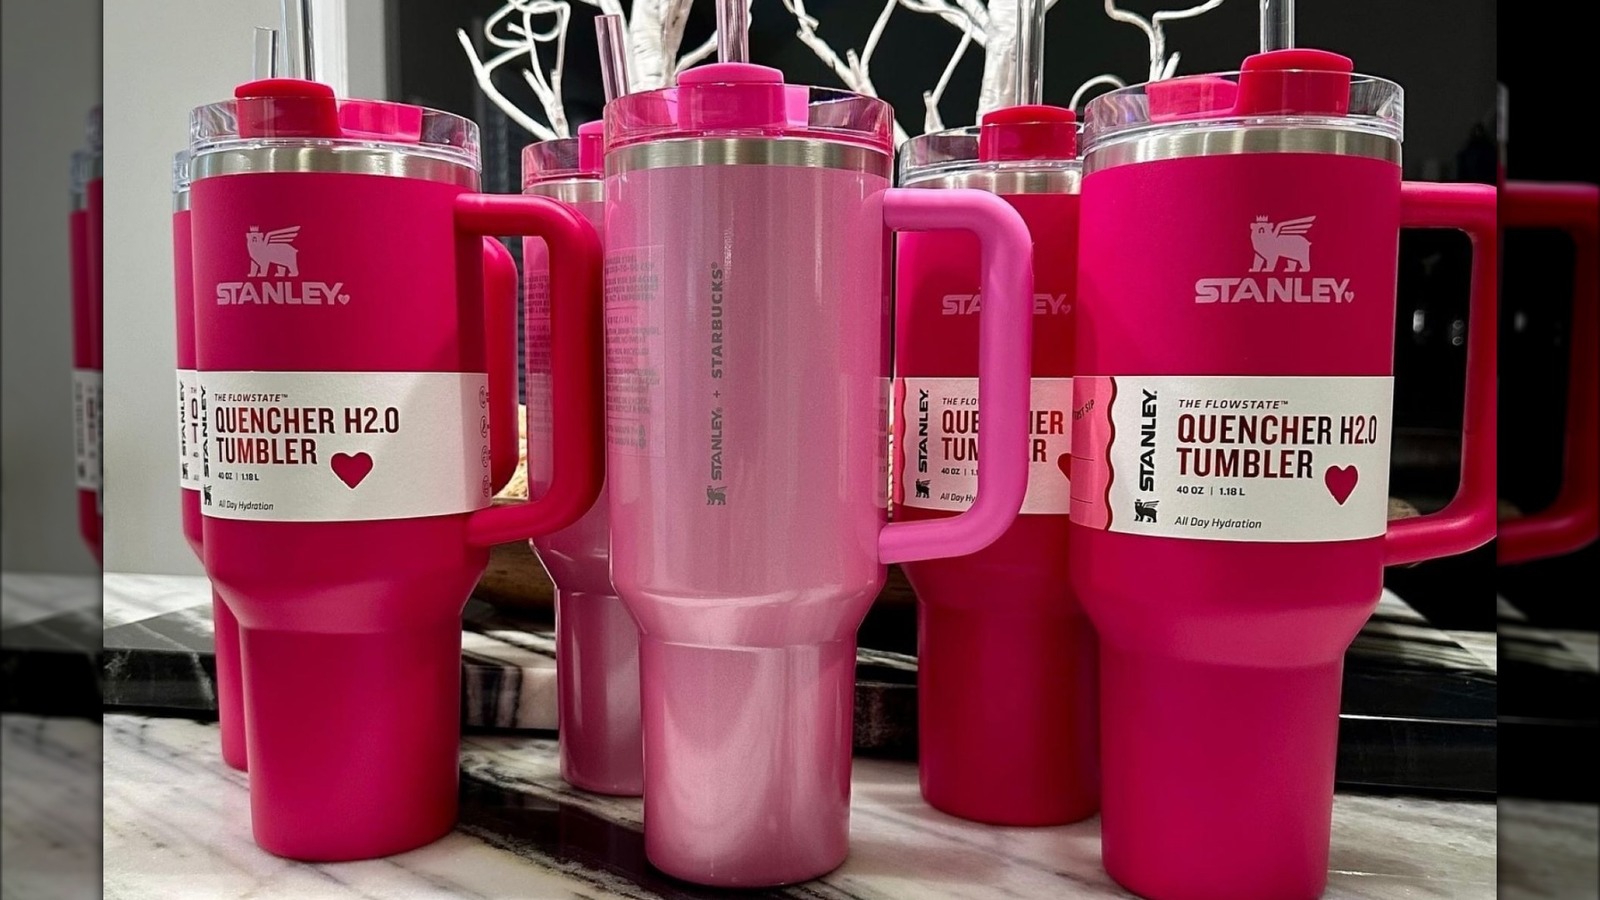 Starbucks Stanley Cups Won't Be Restocked After Chaos at Target